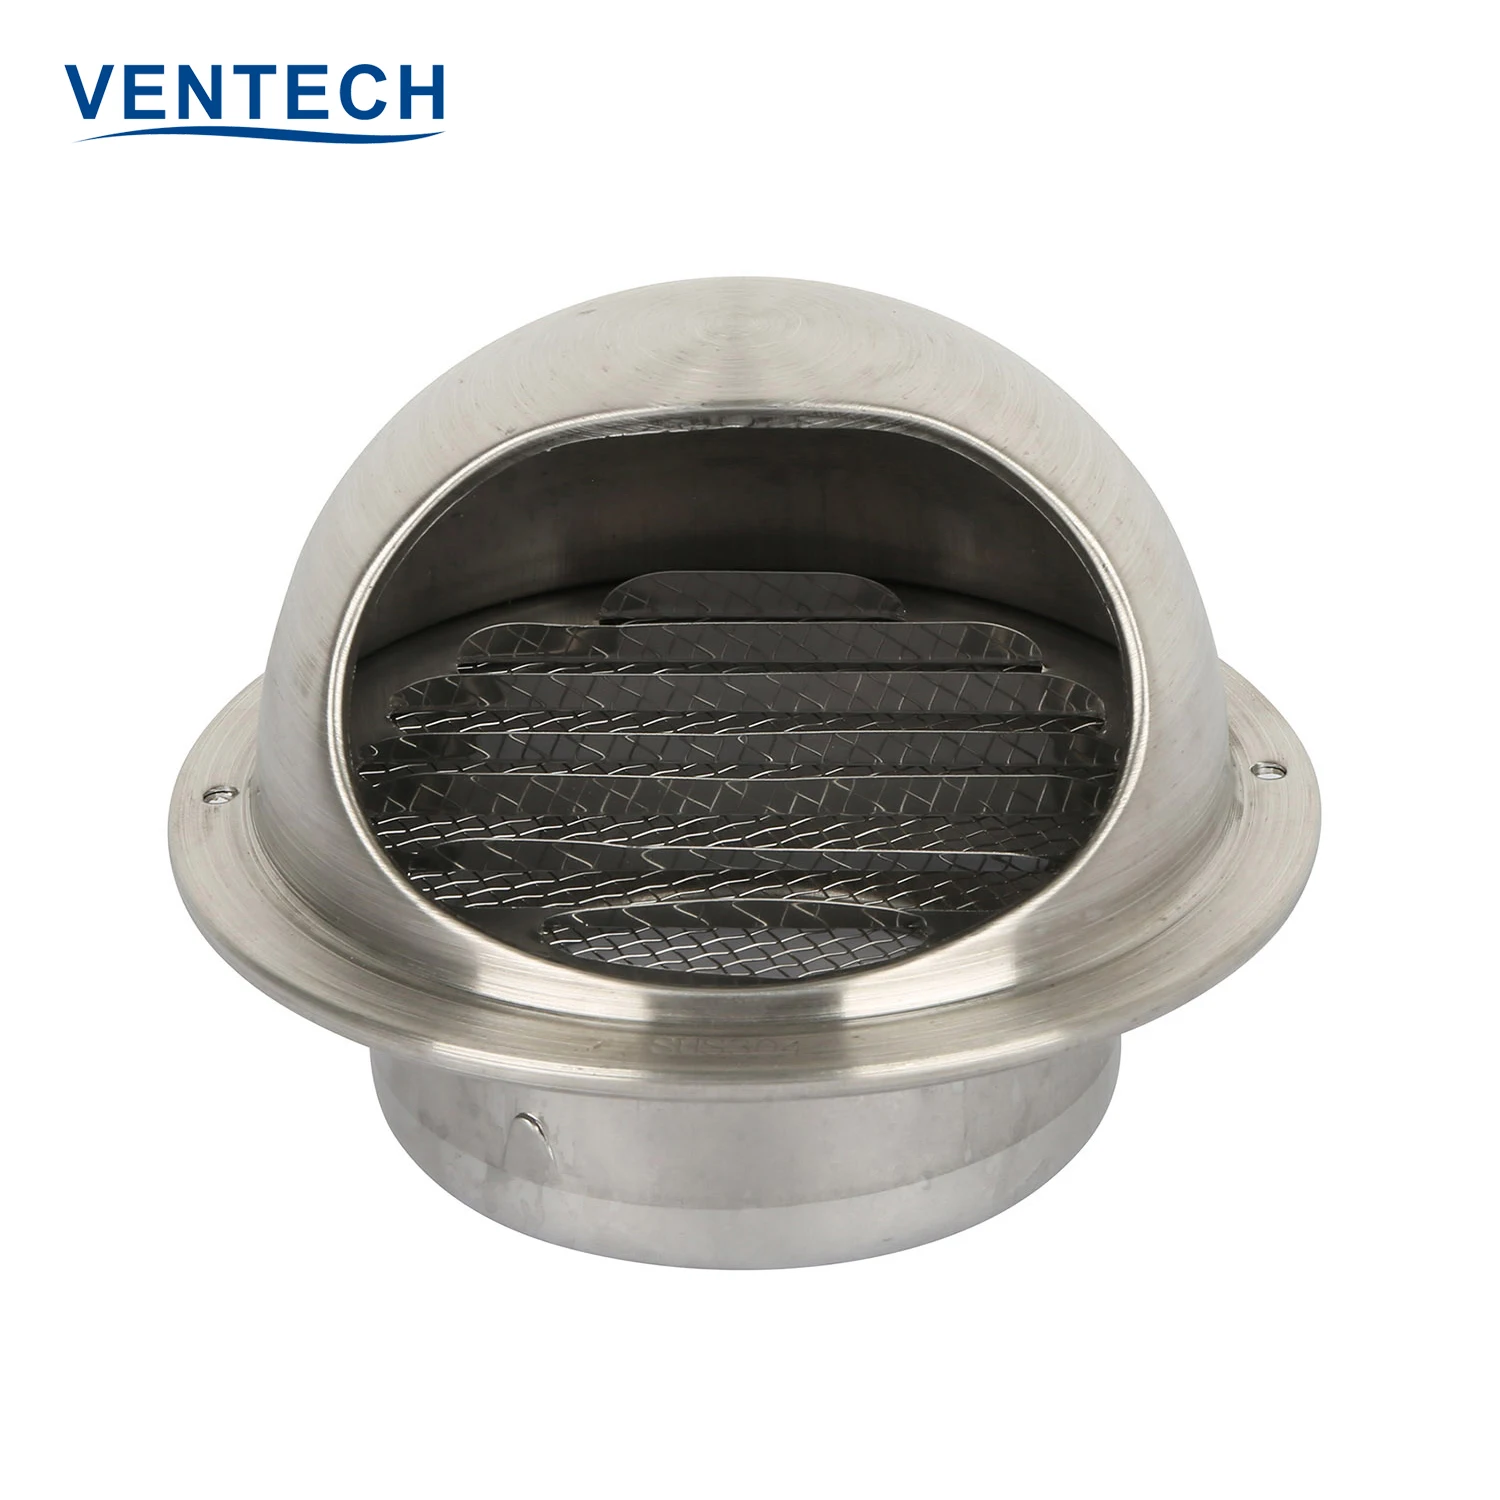 Hvac System Sus Cap Custom Shape Air Grille Stainless Steel Vent Covers For Ventilation